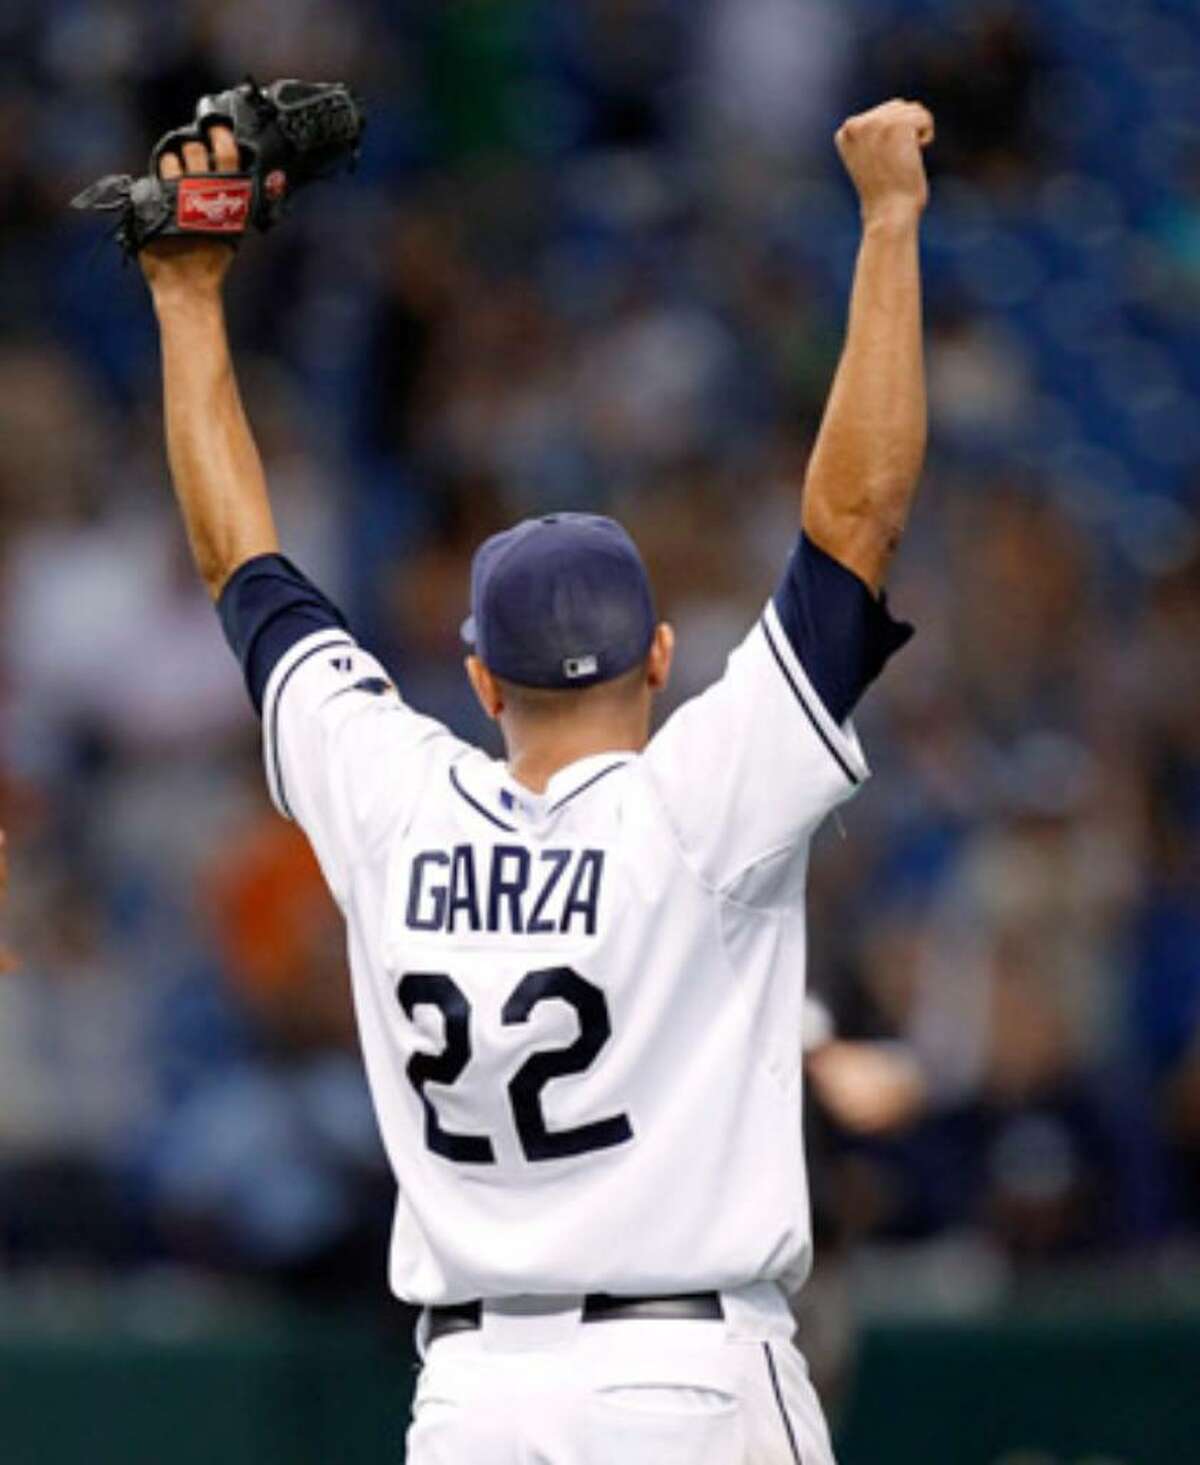 Tampa Bay’s Matt Garza celebrates the final out of his no-hitter Monday night. It was the fifth gem of the season.